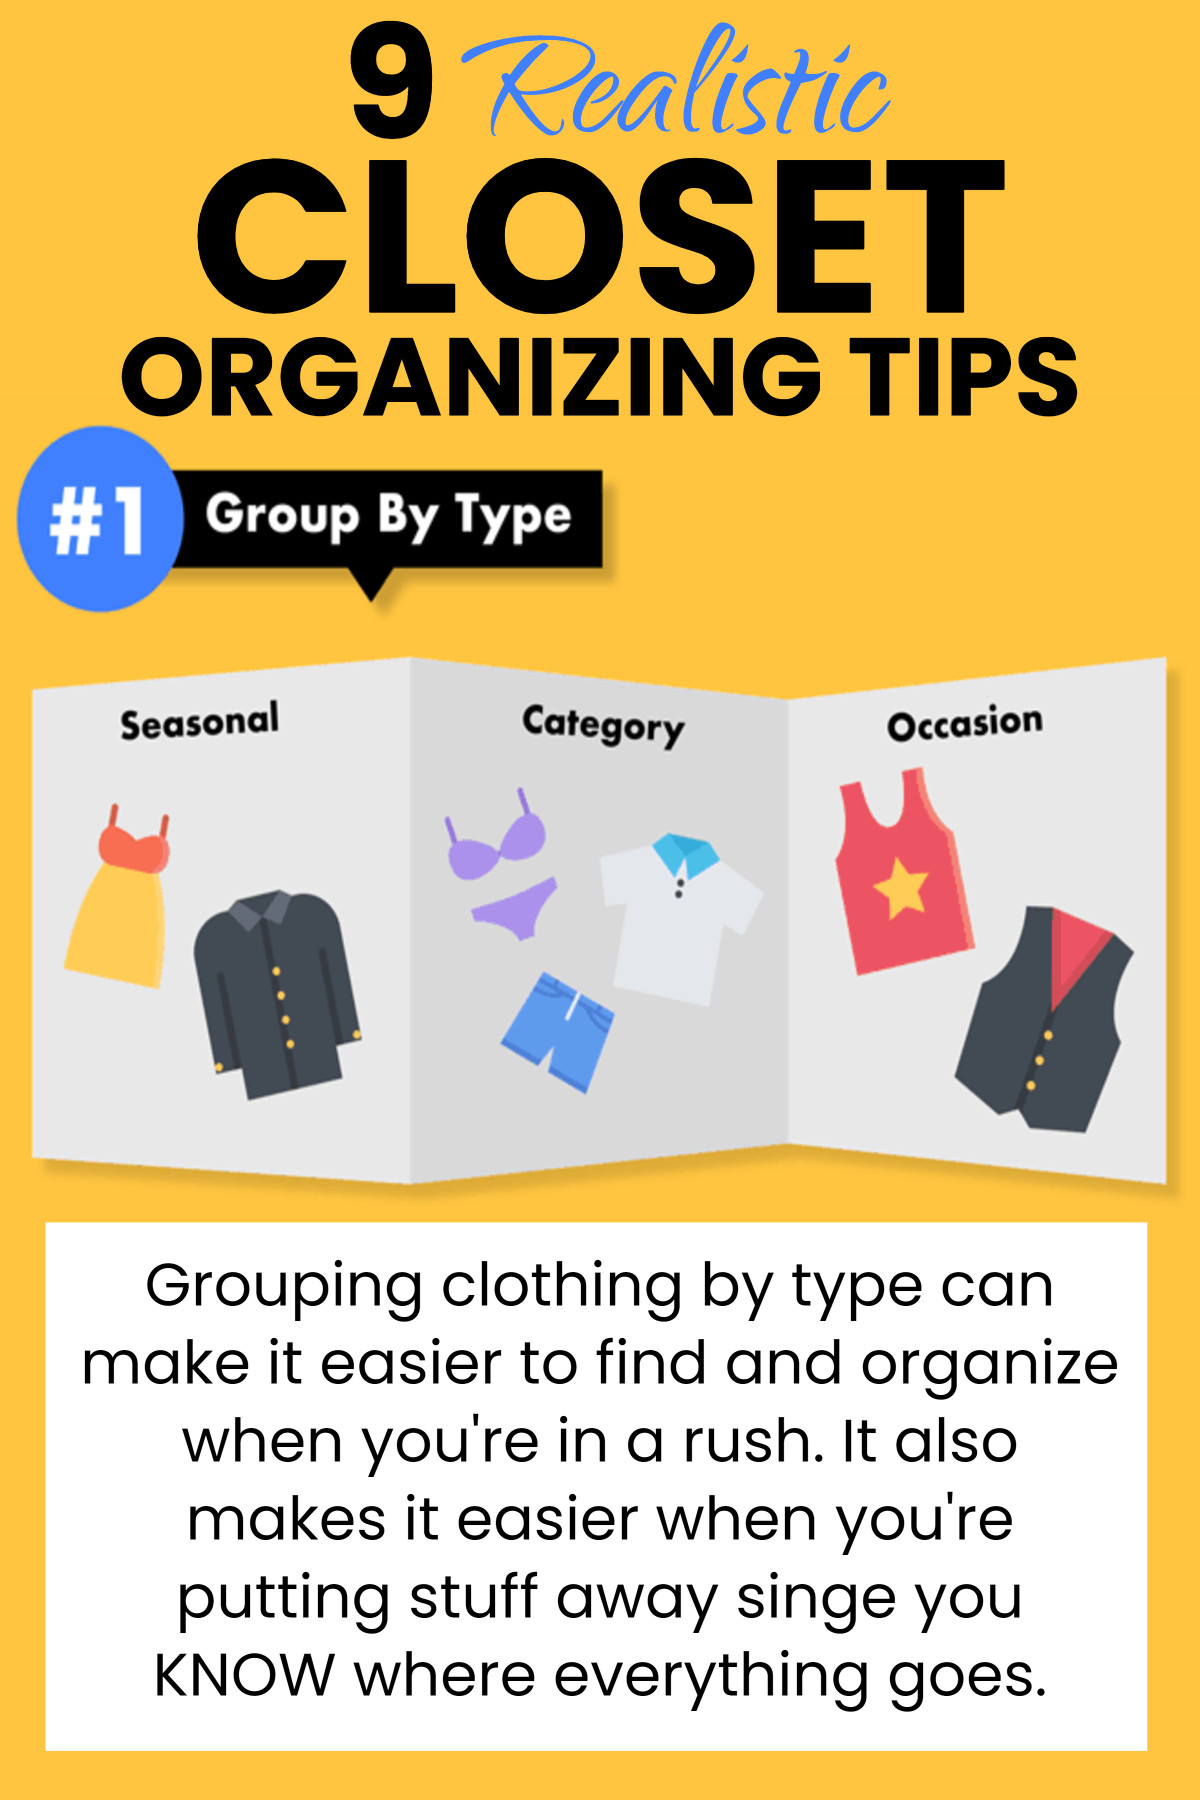 9 Realistic Ways To Organize Your Closet When You Have Limited Space